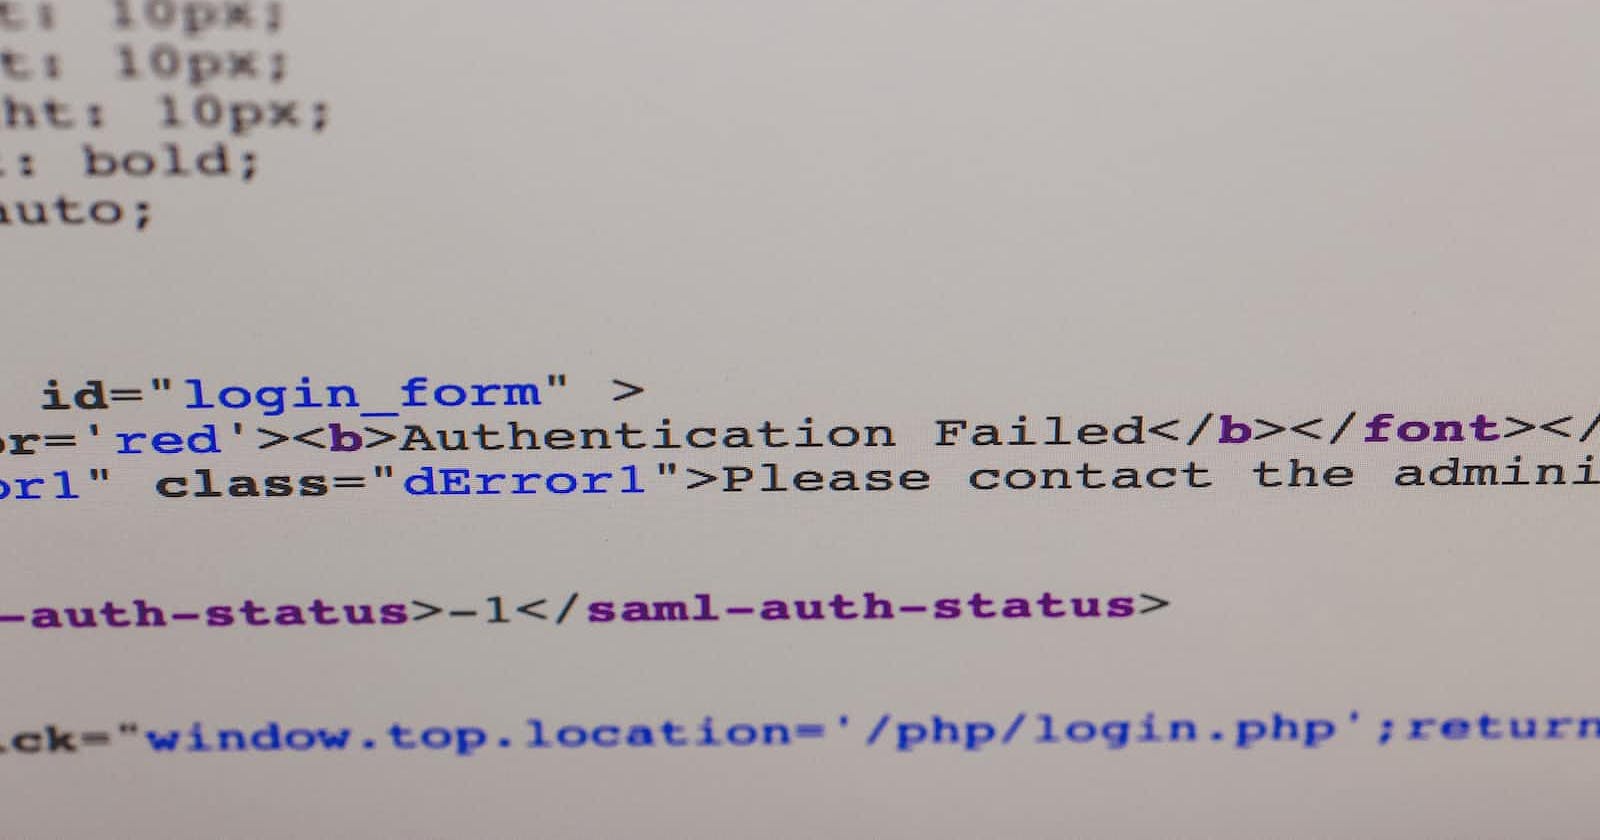 Bulletproof Your Database: How to Submit HTML Form Data to MySQL Using PHP While Safeguarding Against SQL Injection Attacks